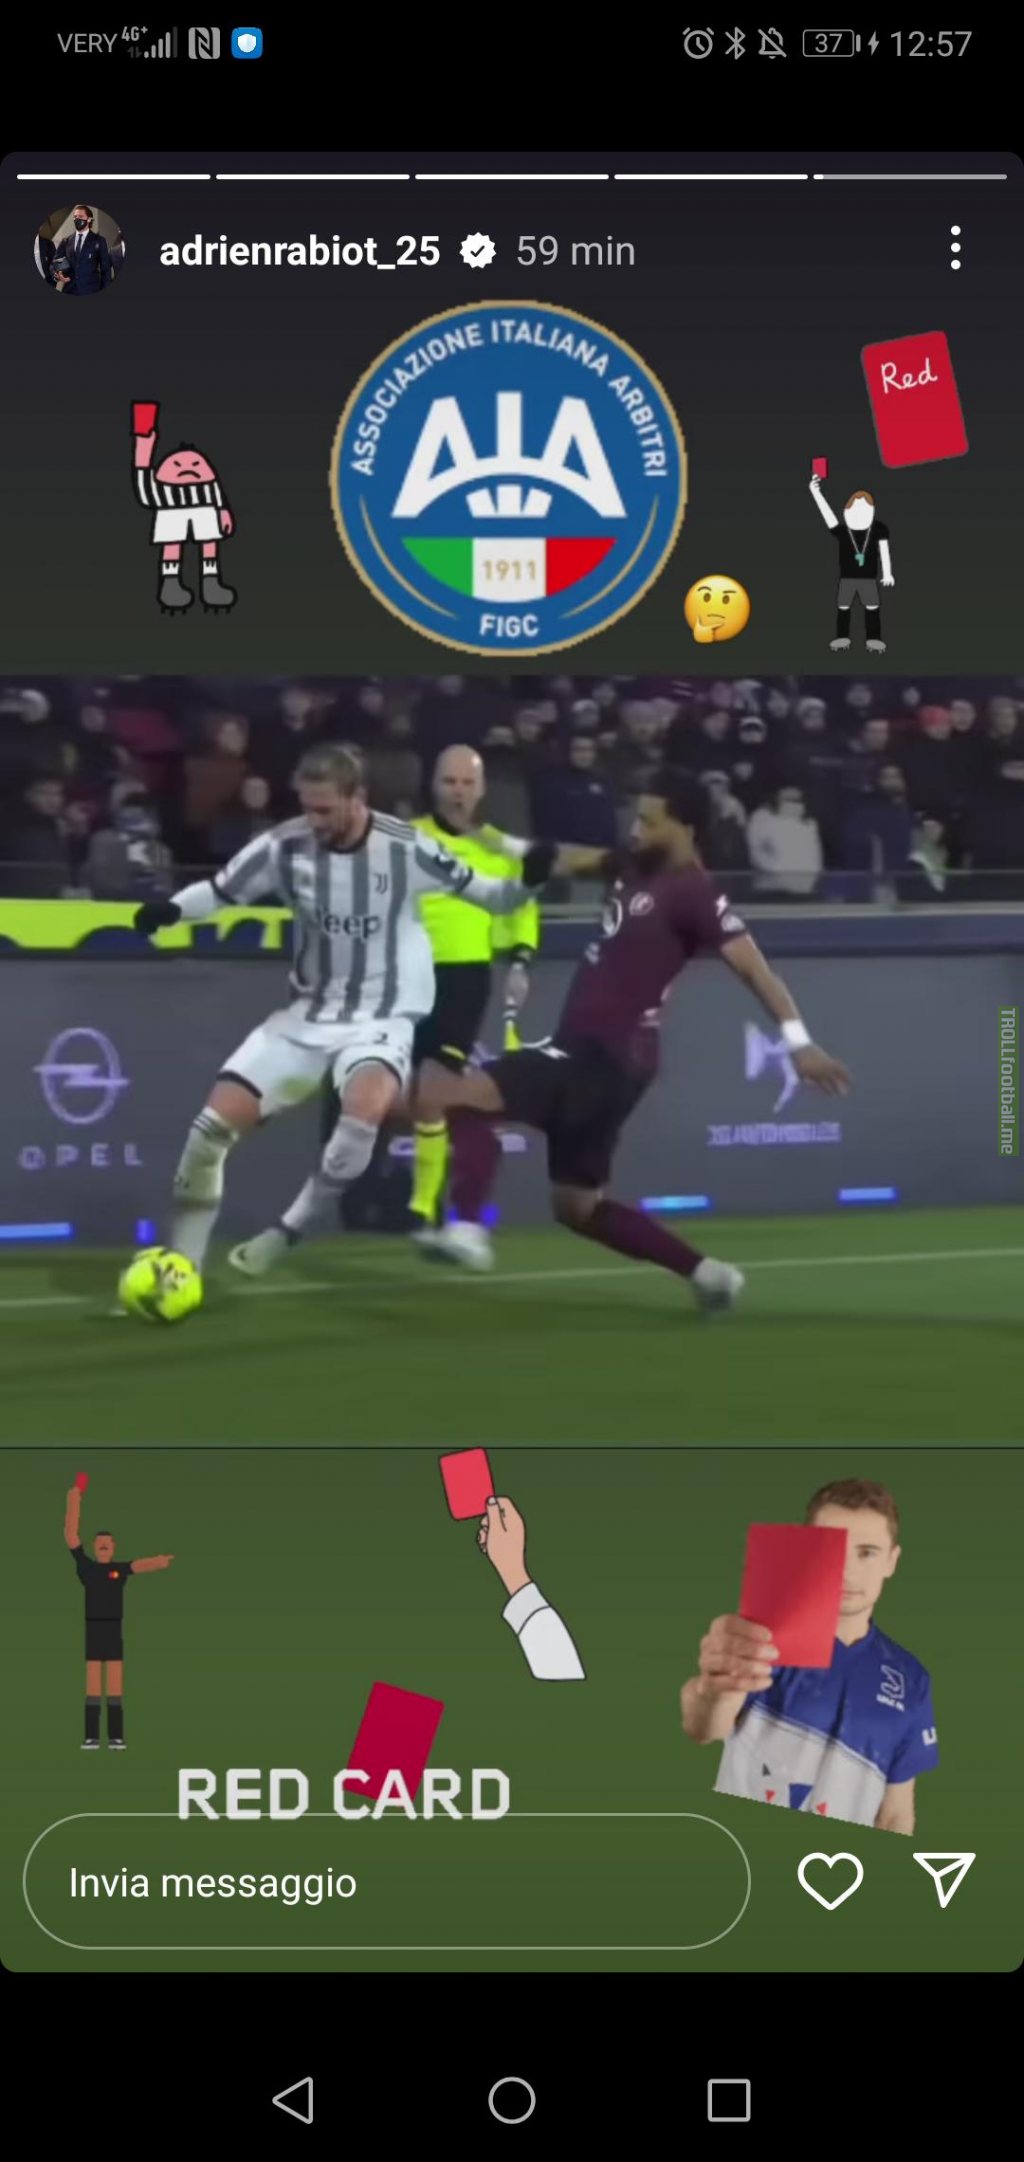 Adrien Rabiot's latest Instagram stories complaining about the referee.